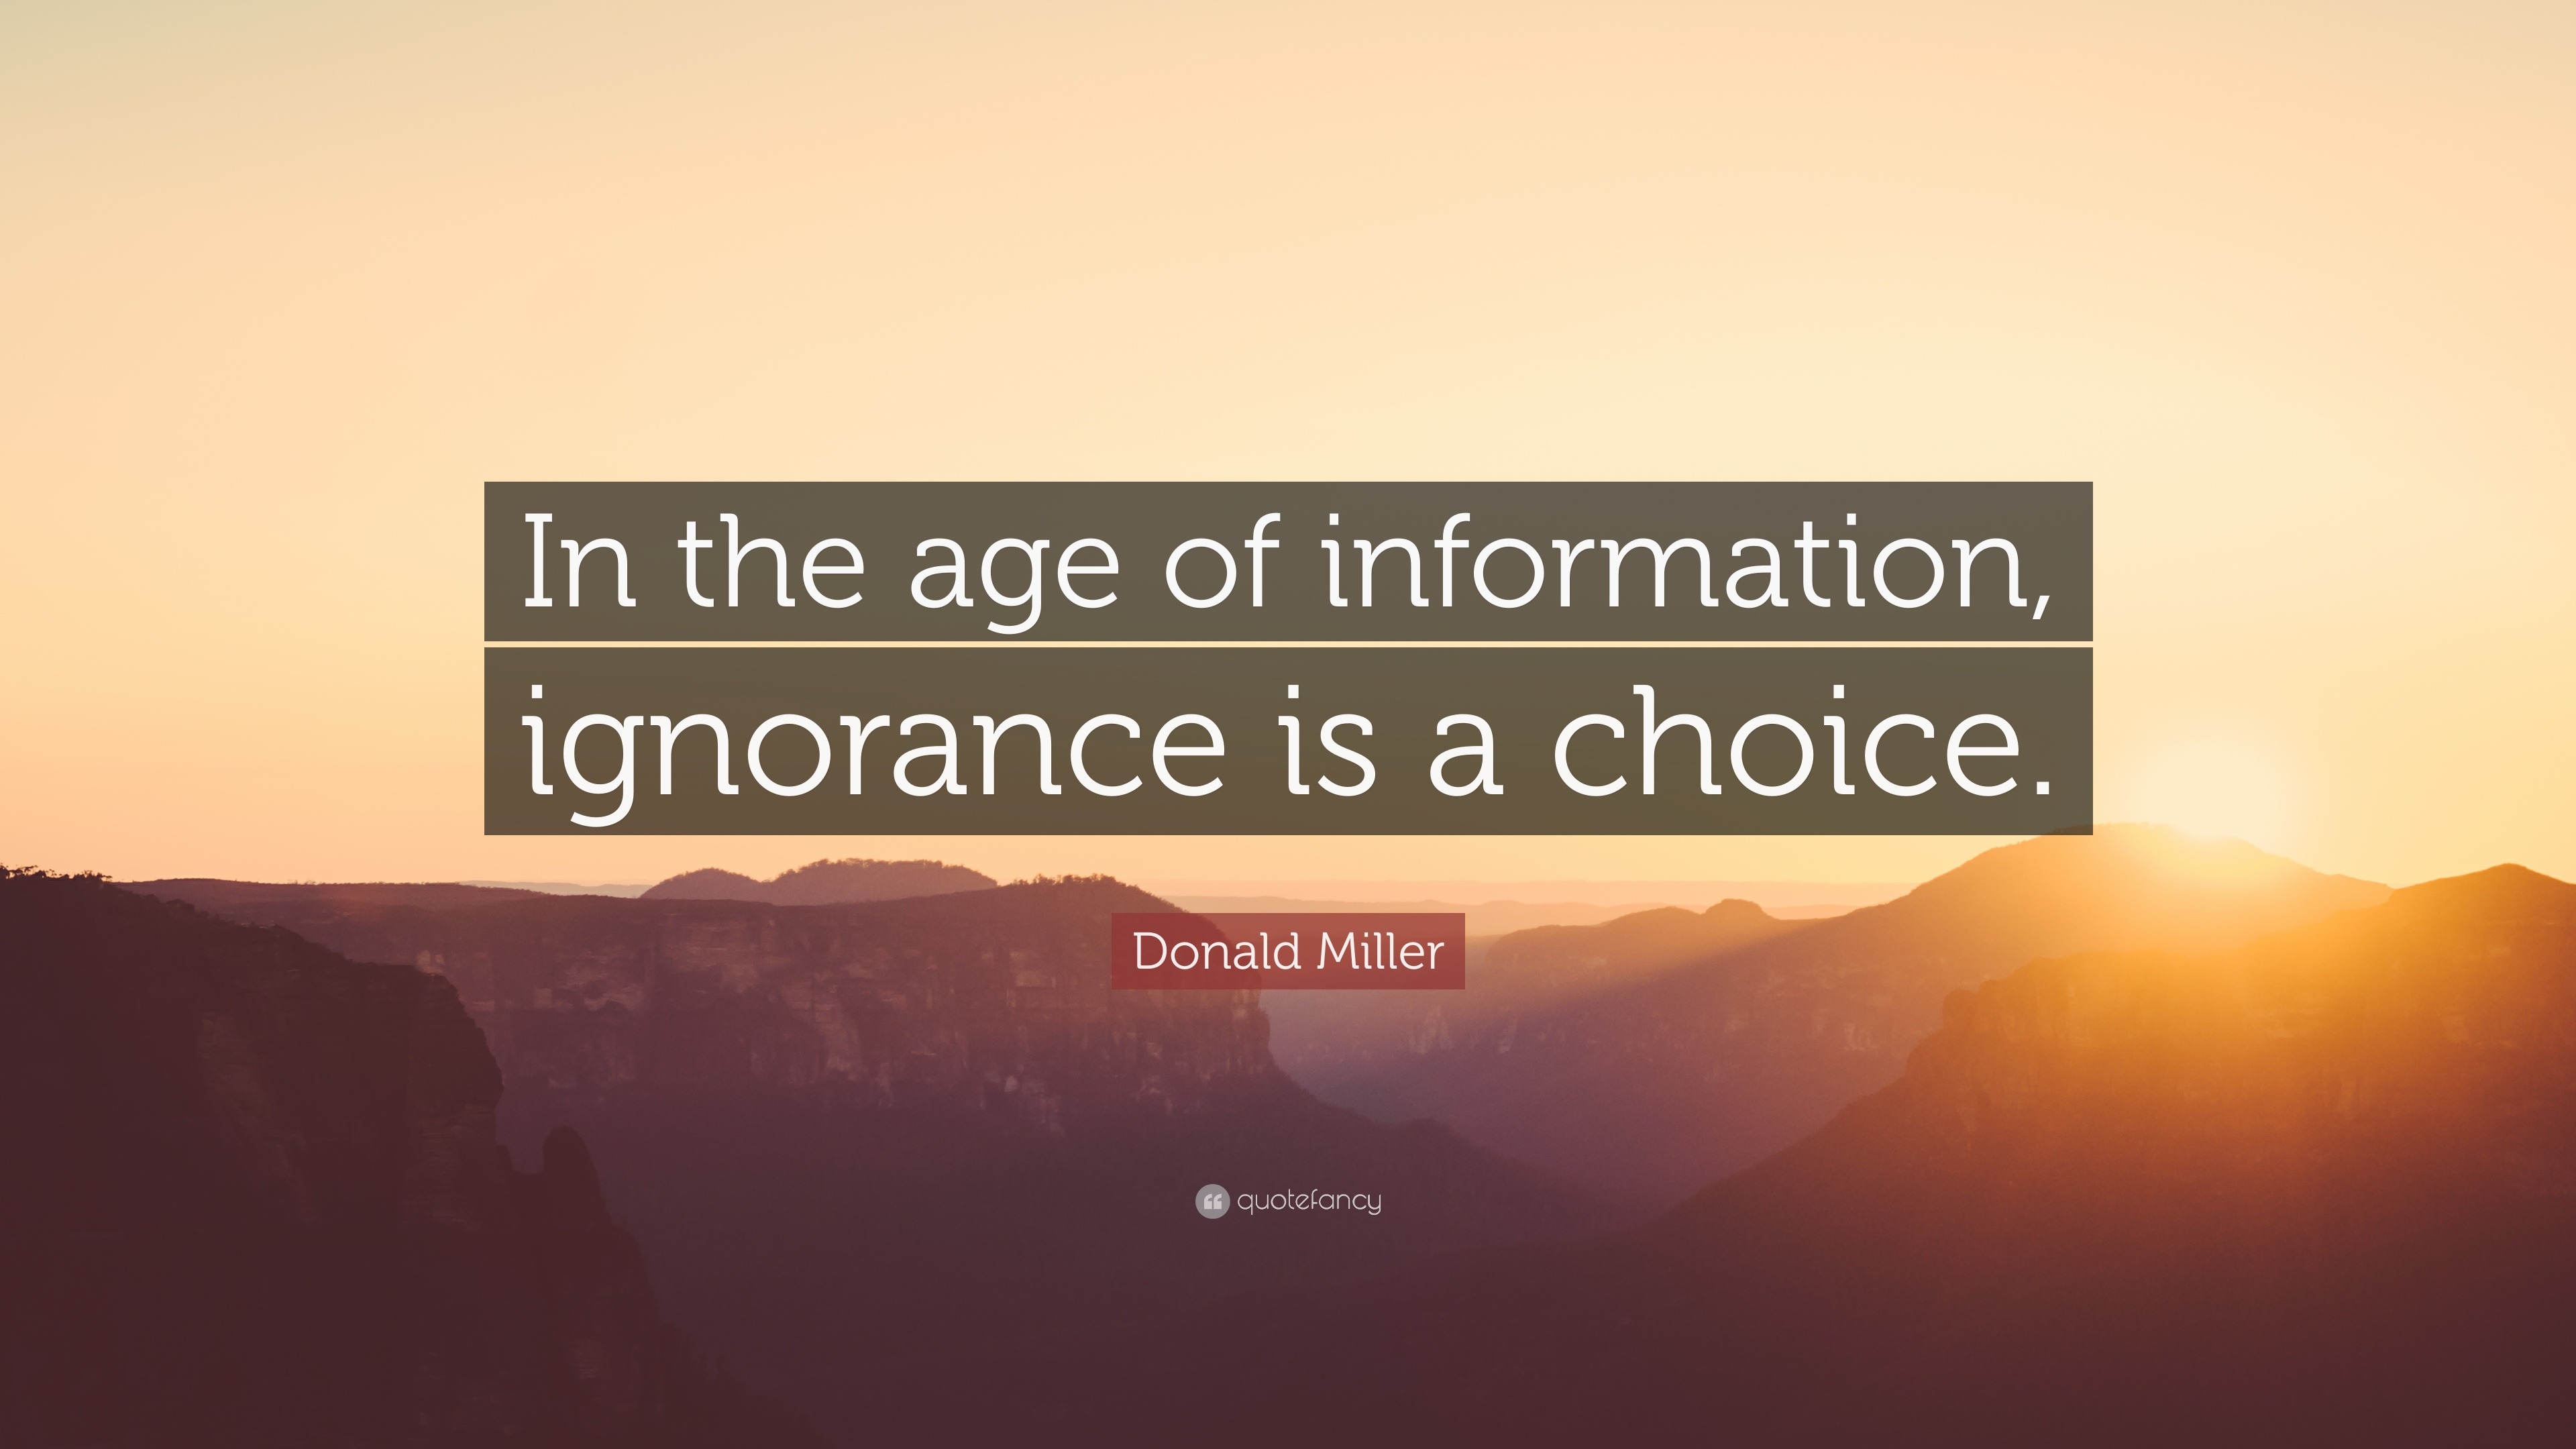 Ignorance Quotes And Sayings